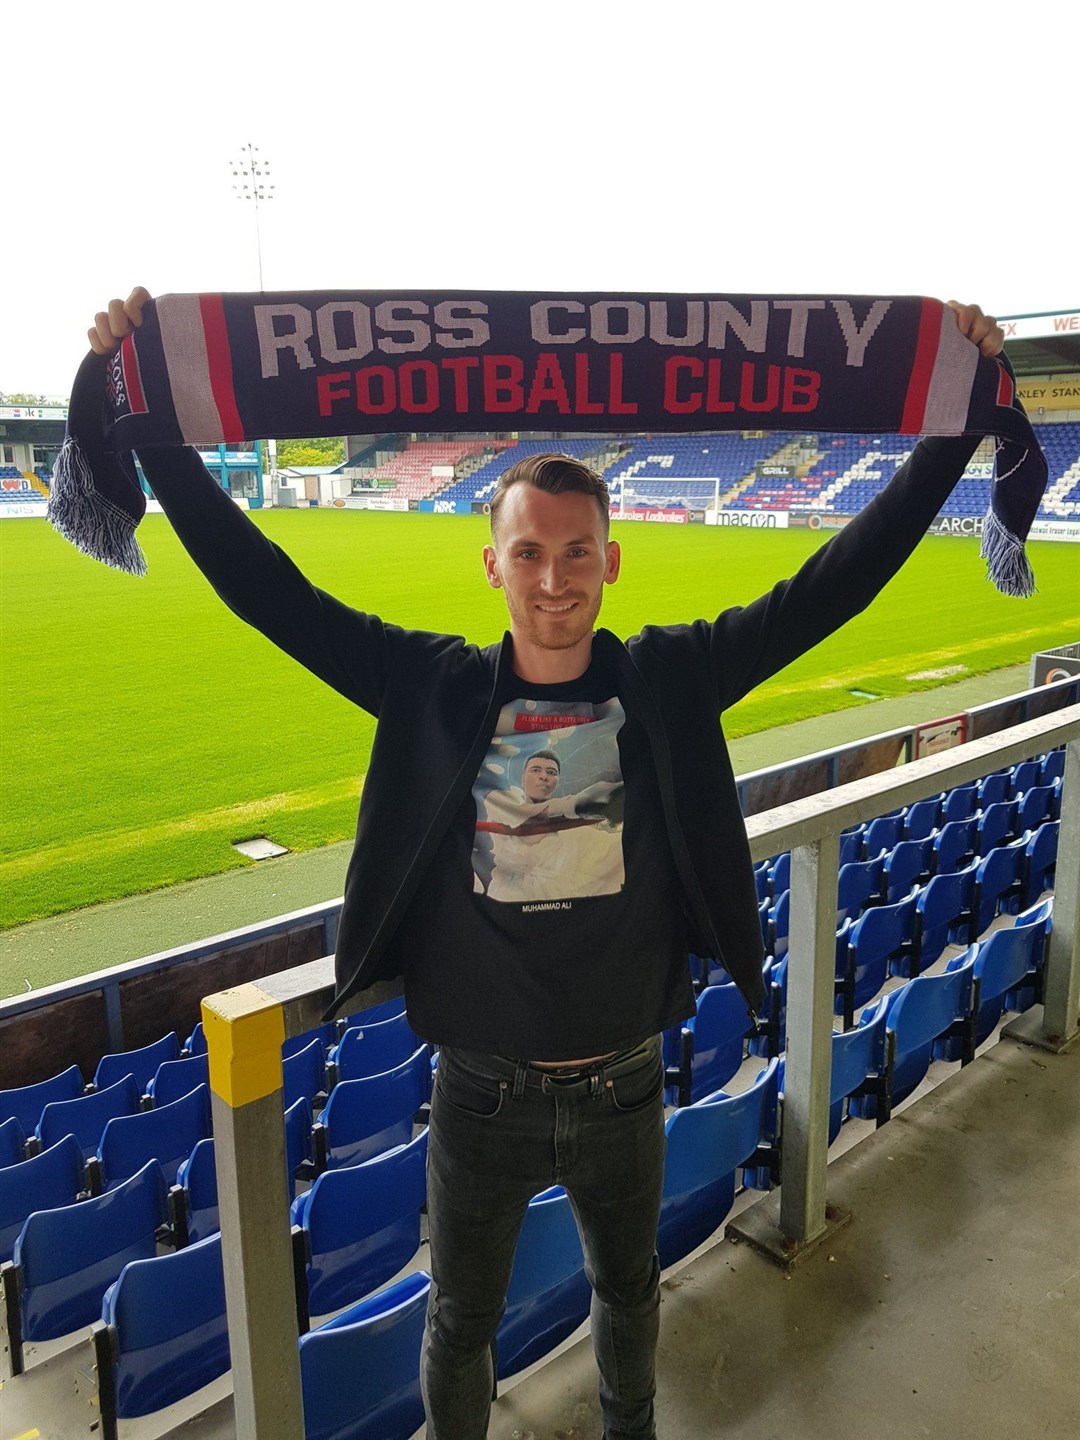 Joe Chalmers has left Inverness Caledonian Thistle to sign for Ross County on a two-year deal.